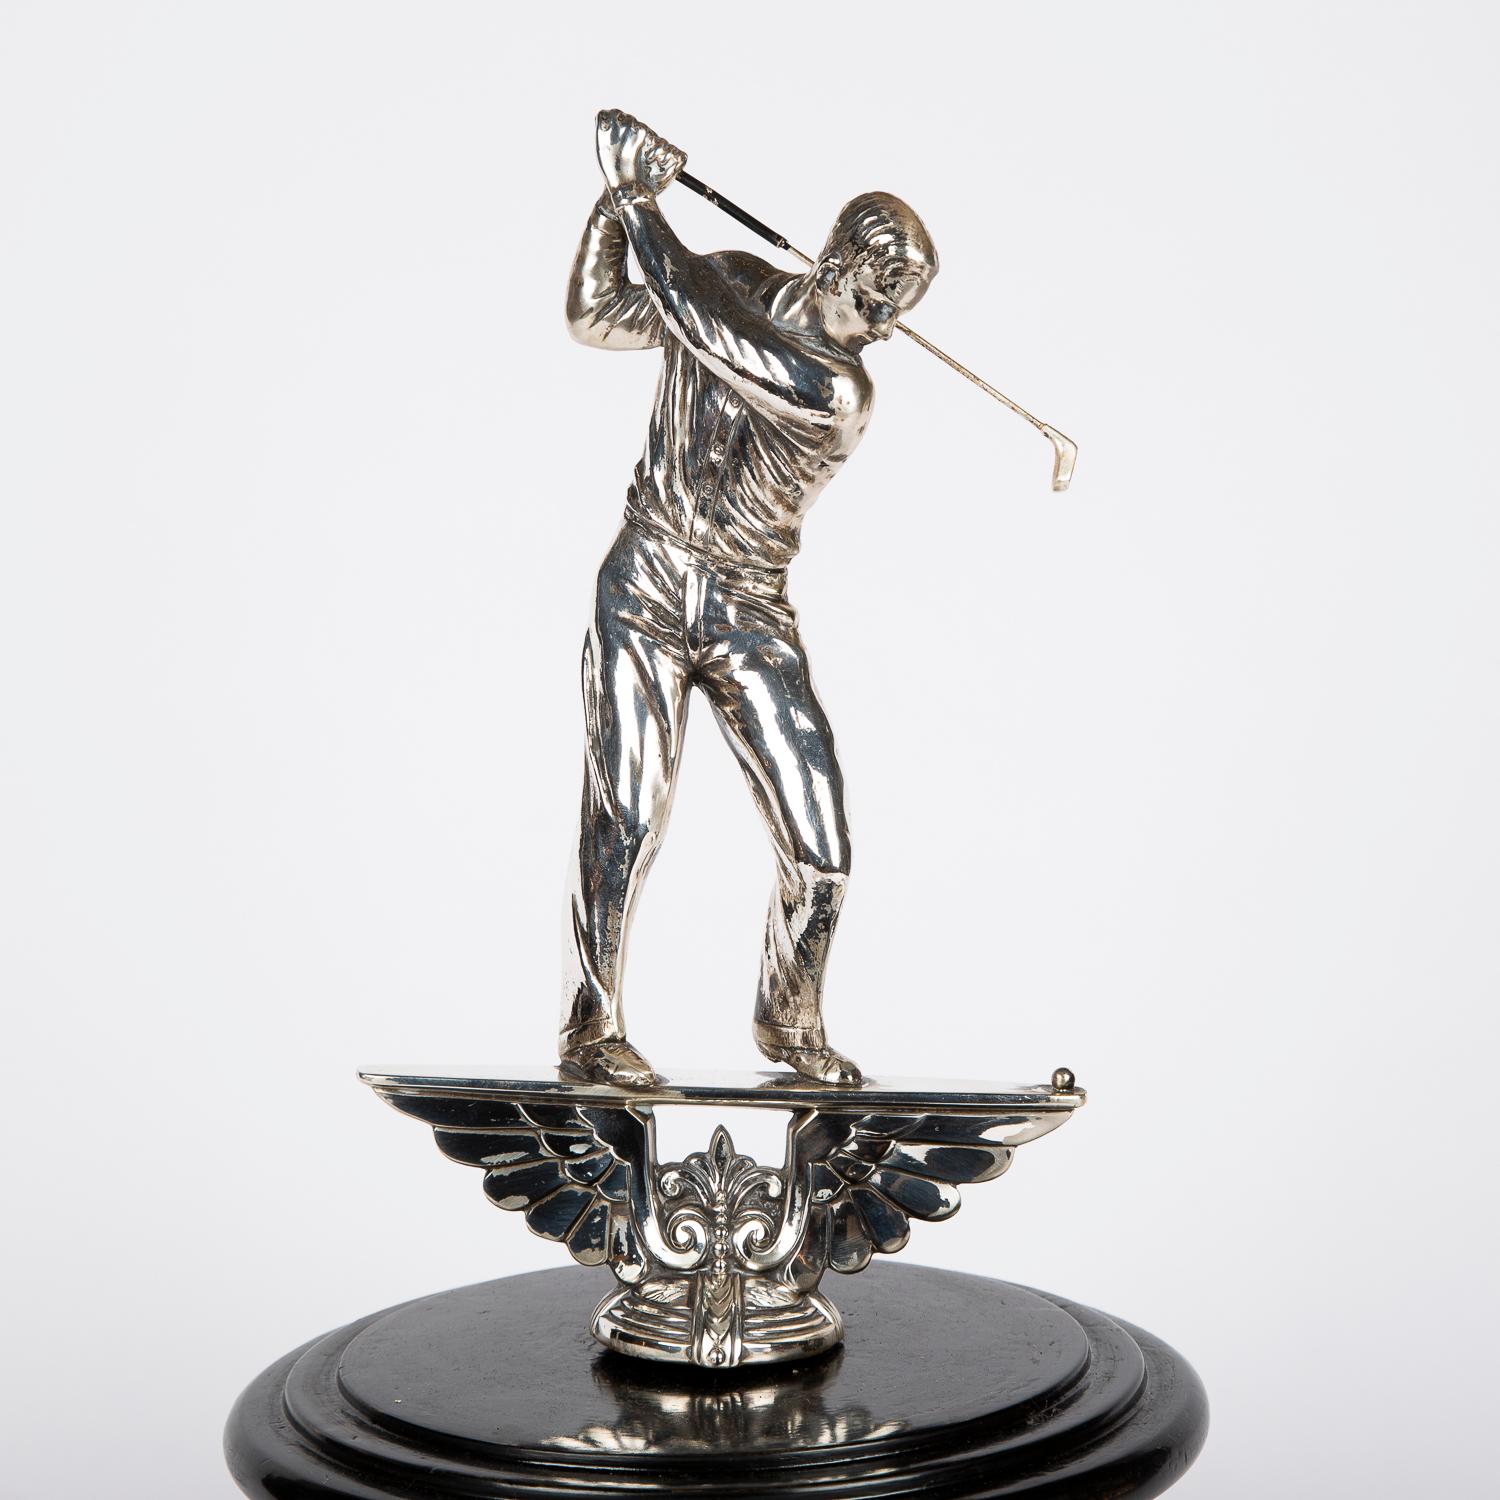 A golf trophy with a nickel-plated golfer teeing off with a driver on a turned ebonized base.